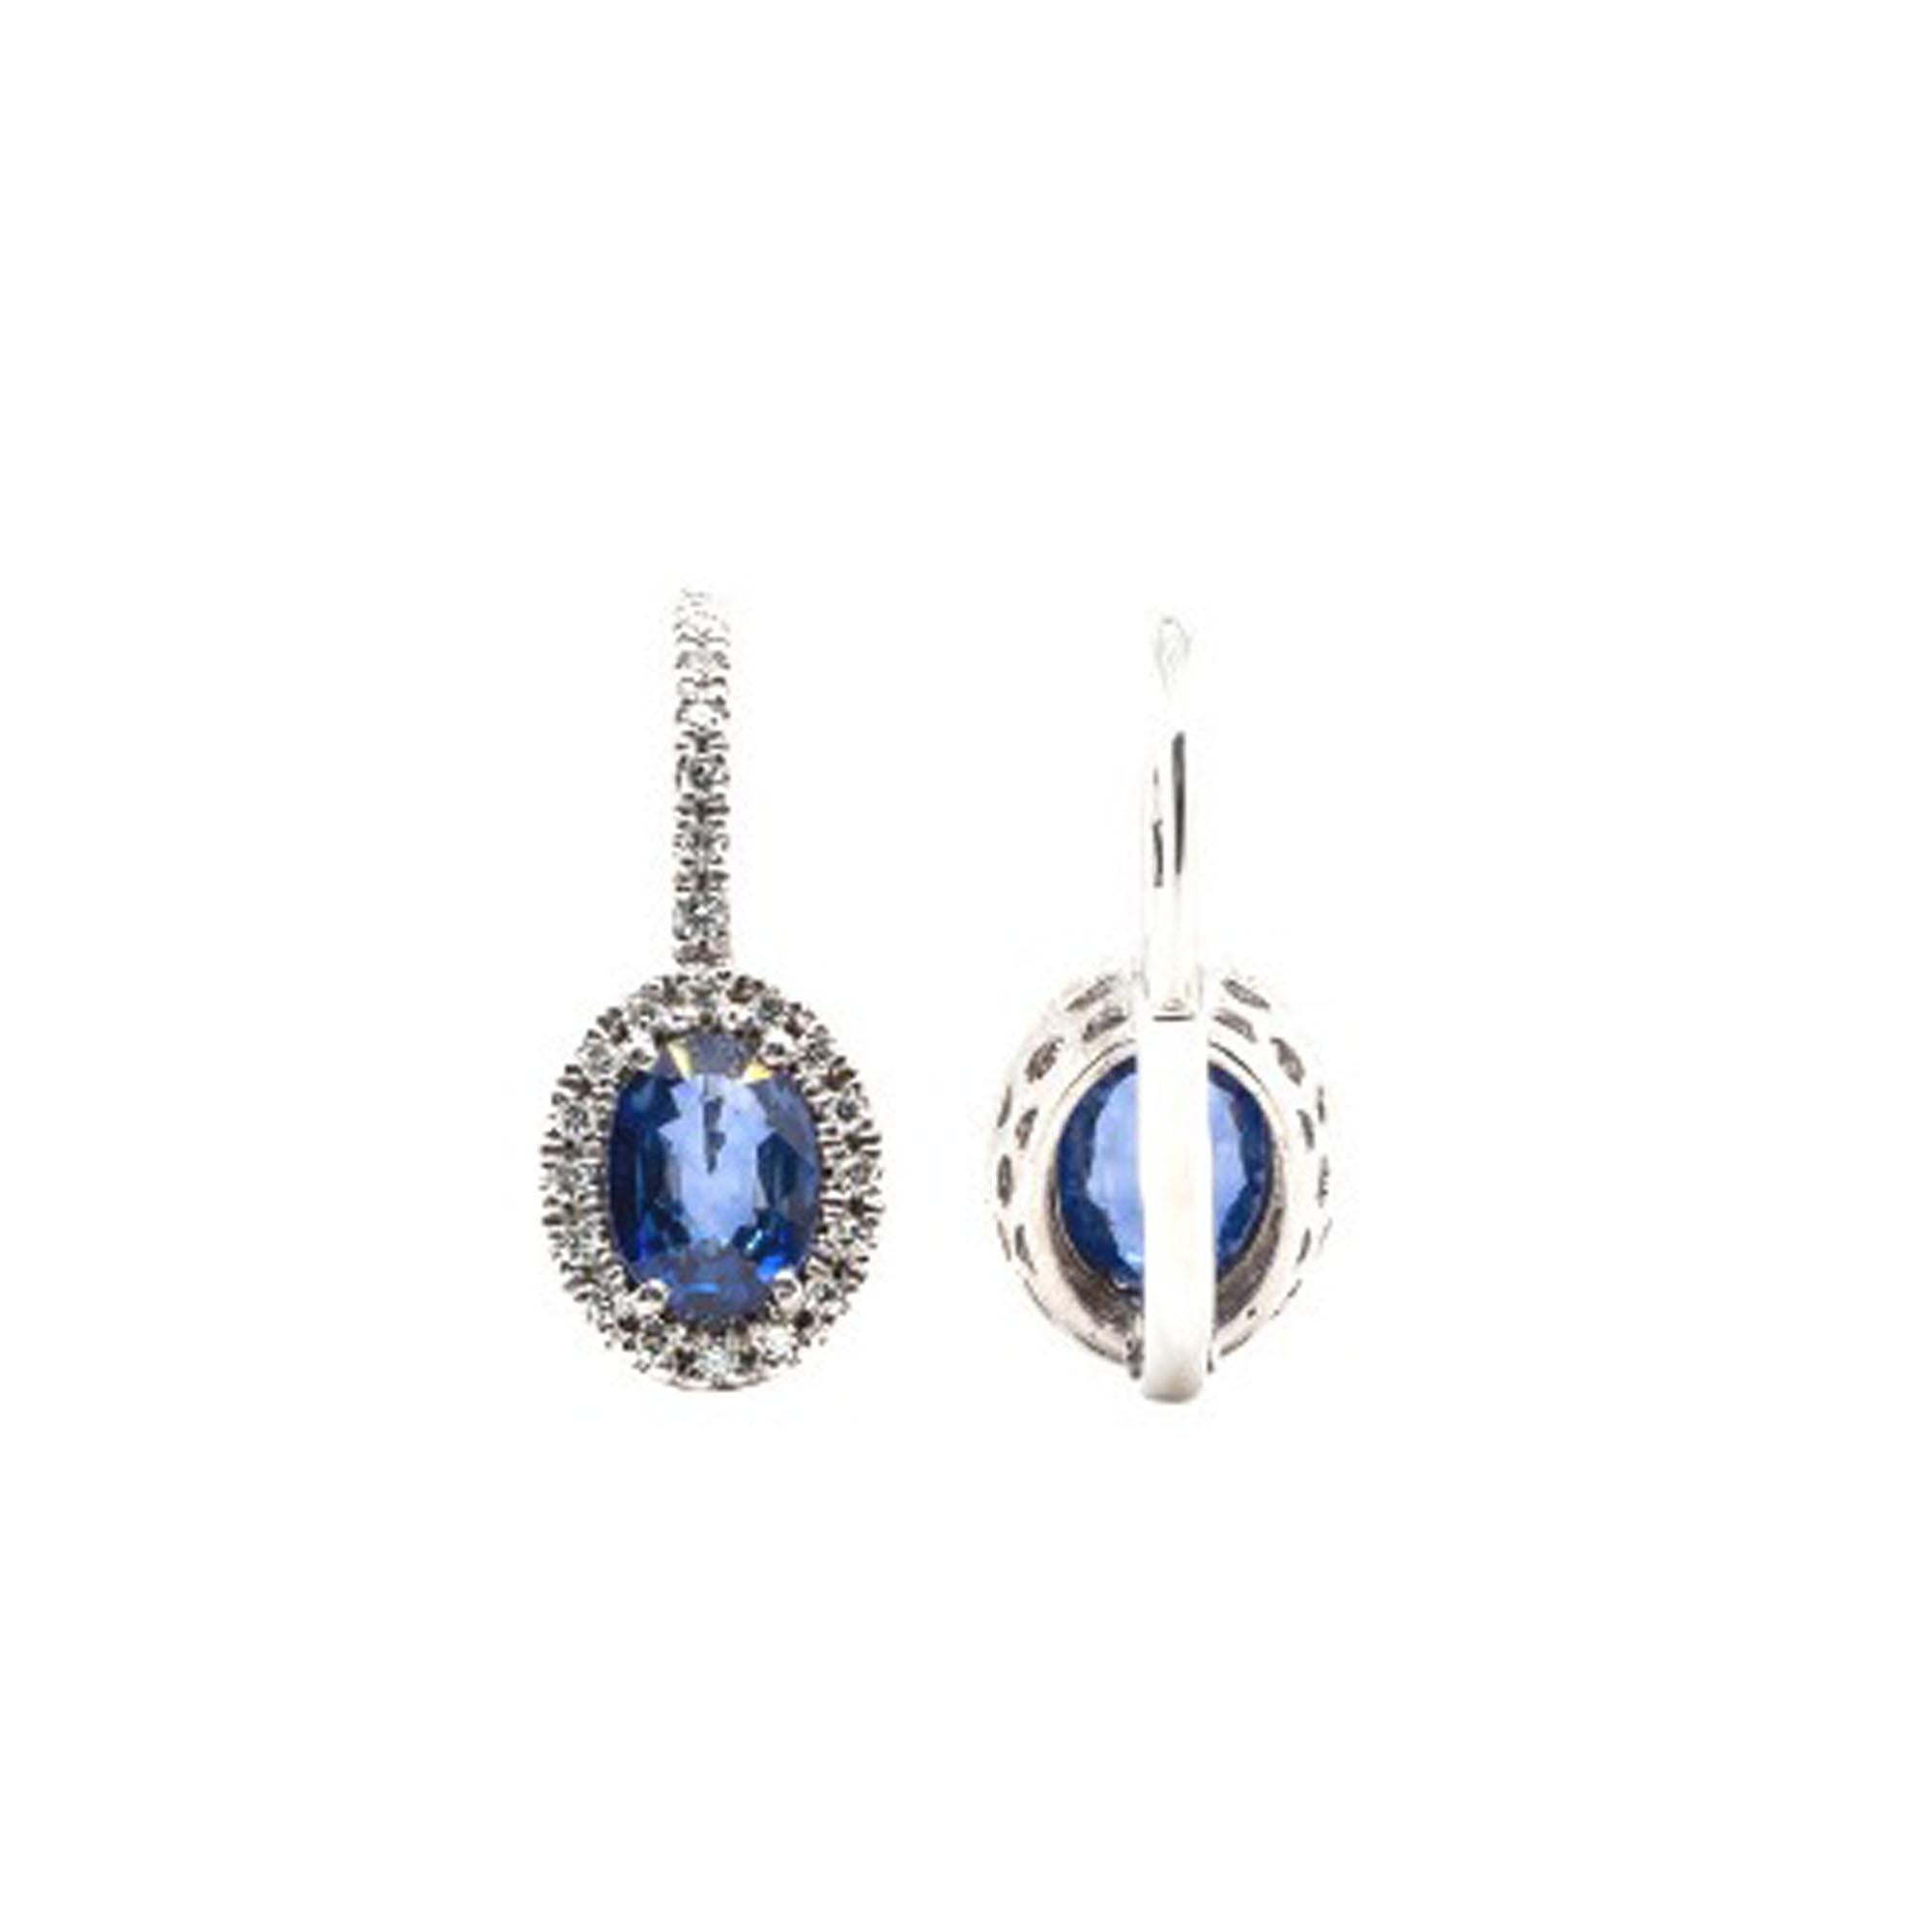 Contemporary 21st Century 18-Karat White Gold with Blue Sapphire, G VS Diamond Drop Earrings For Sale